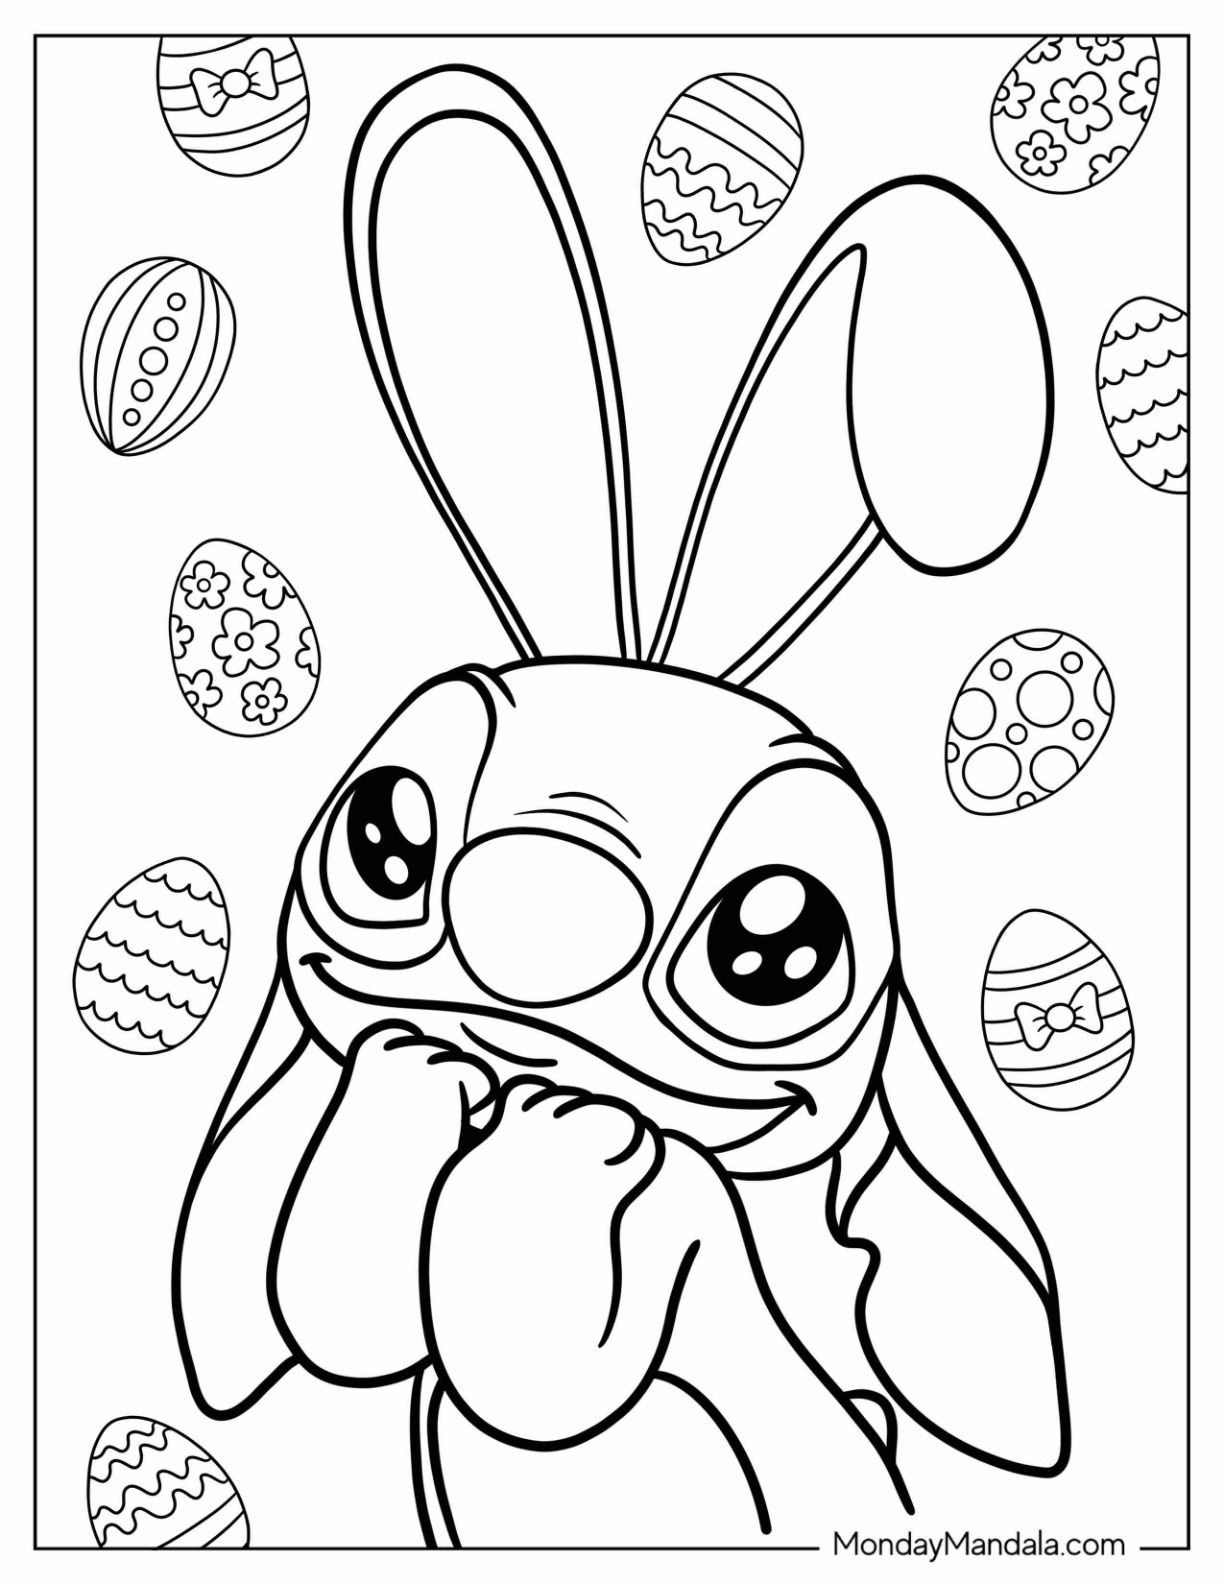 24 Disney Easter Coloring Pages (Free PDF Printables)